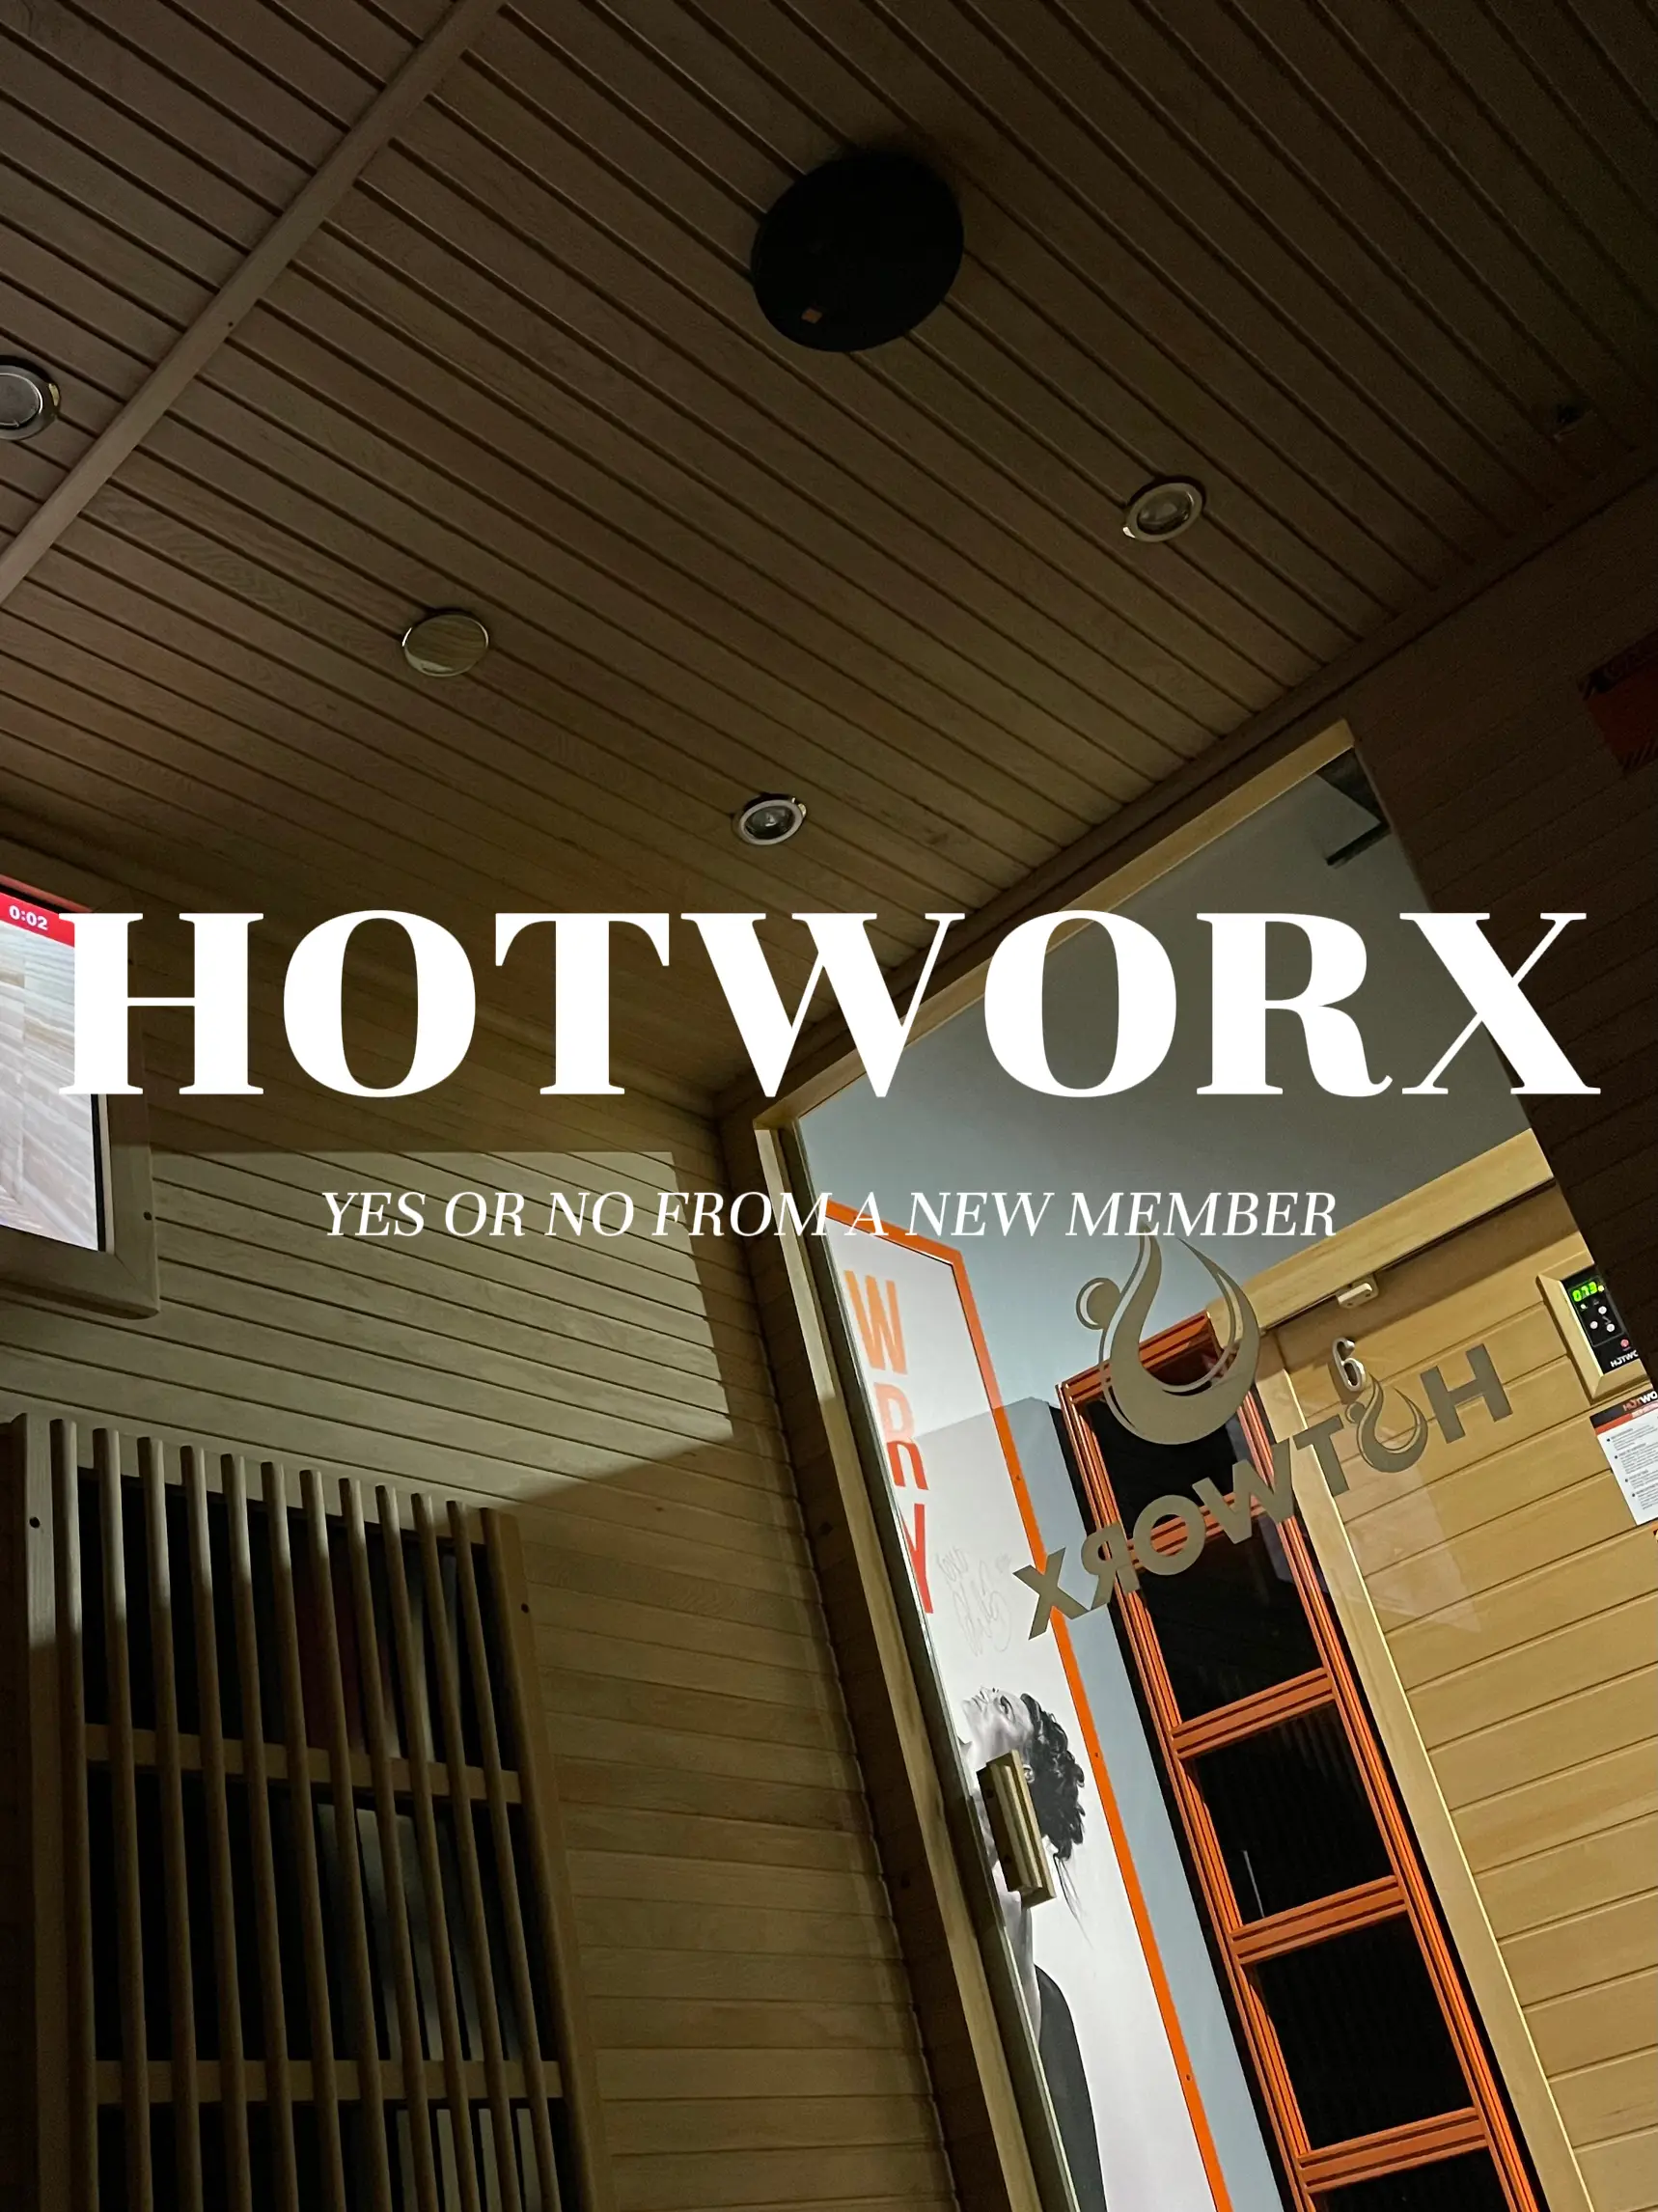 MY FAVORITE HOTWORX SESSION TO BOOK 🔥